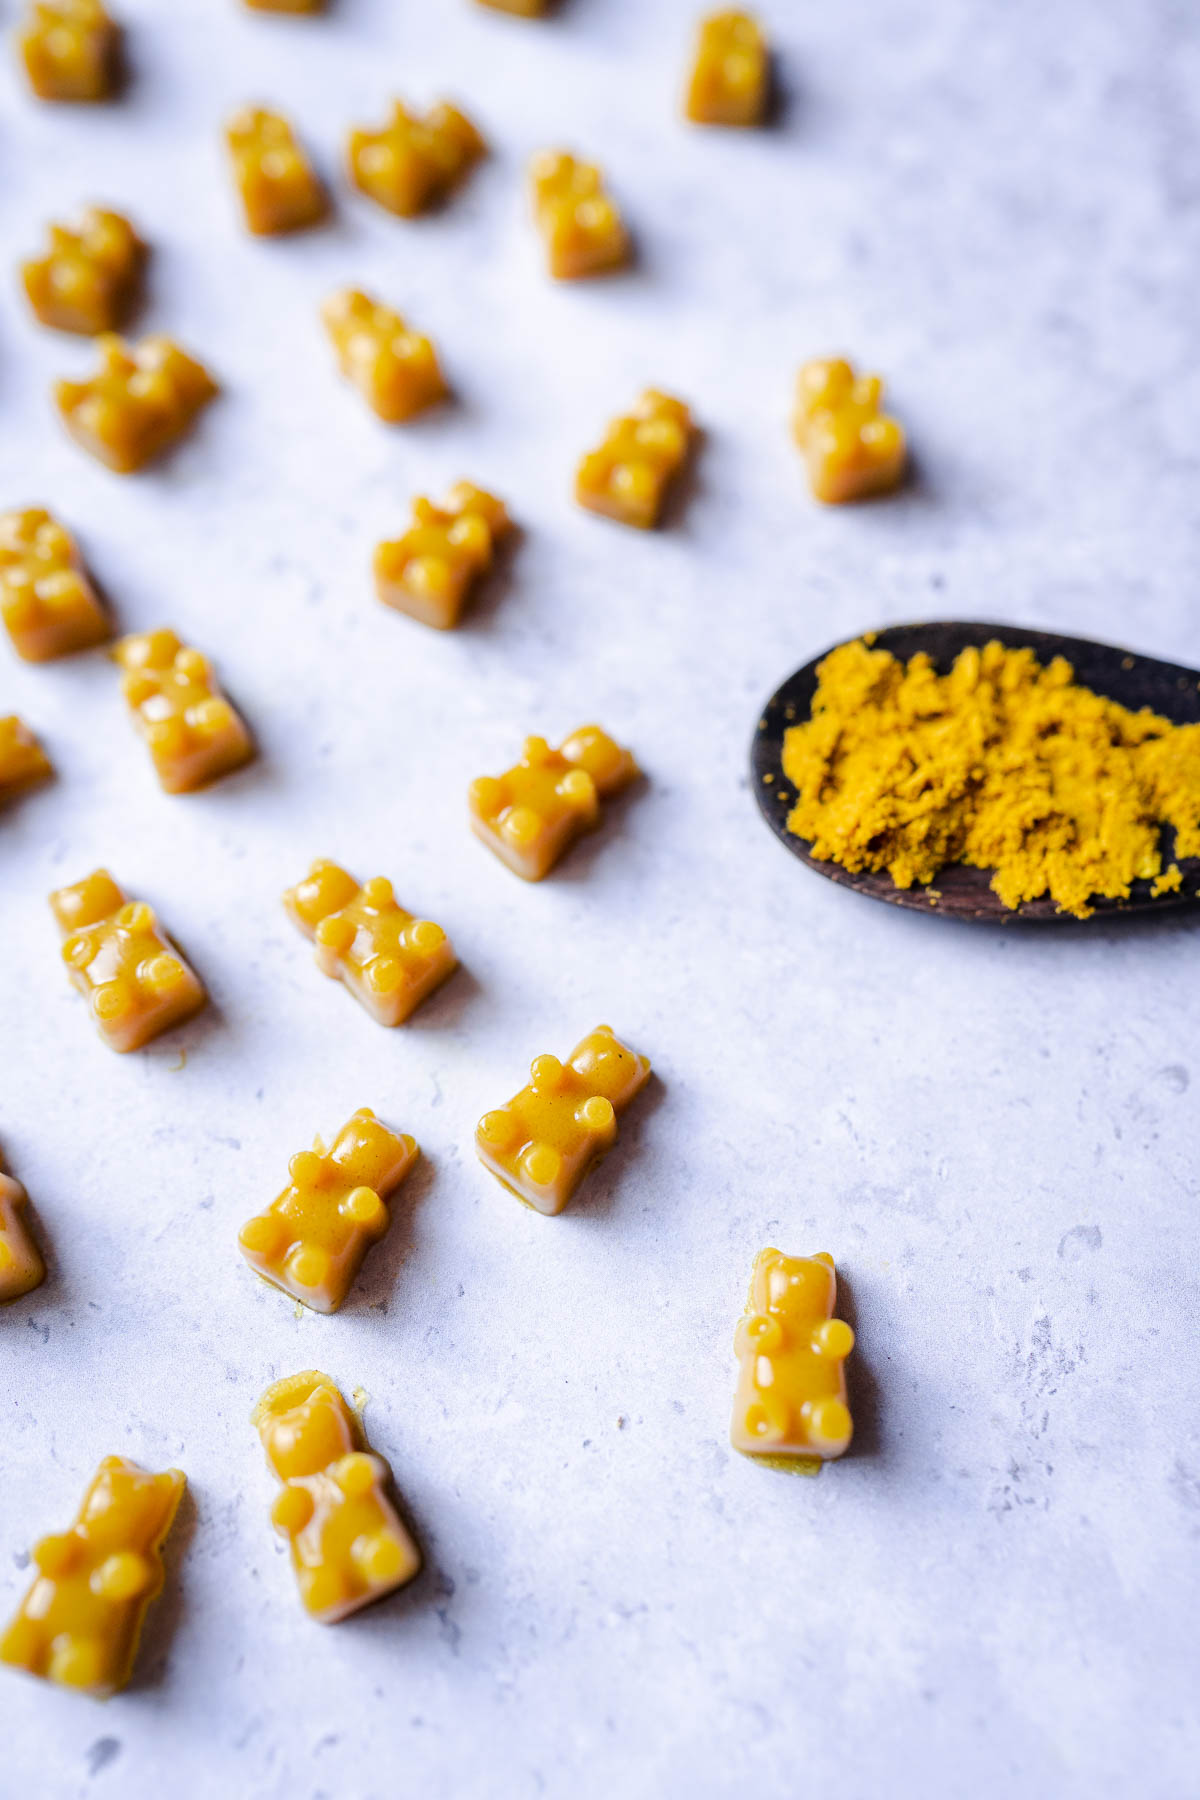 A small wooden spoon filled with golden milk powder rests next to a bunch of yellow gummy bears on a gray tabletop.